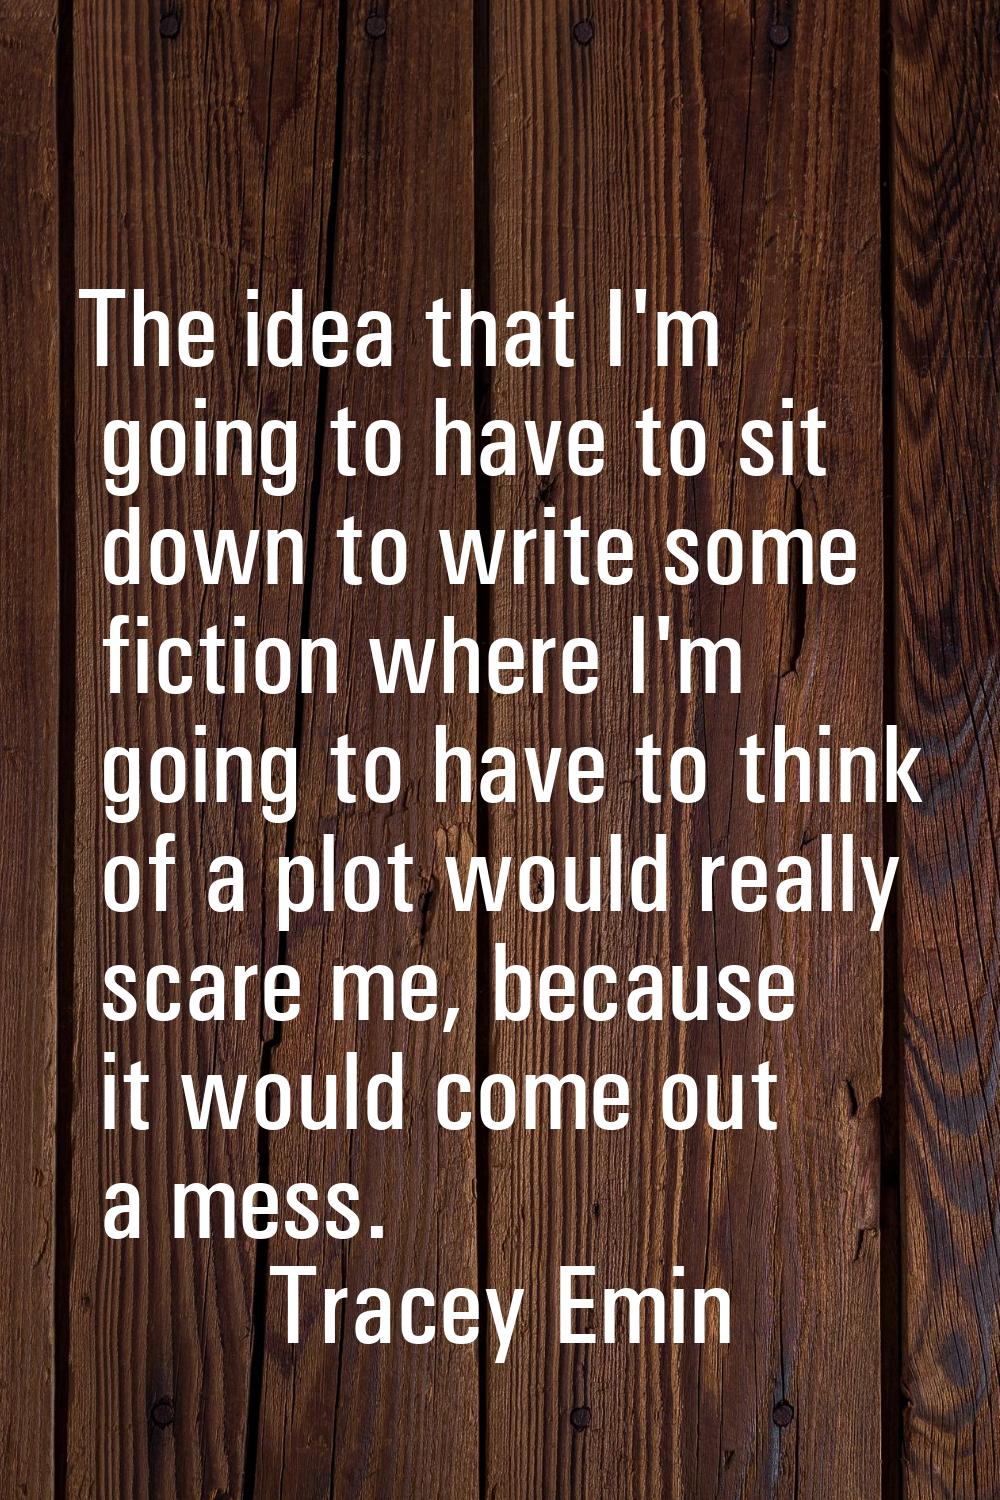 The idea that I'm going to have to sit down to write some fiction where I'm going to have to think 